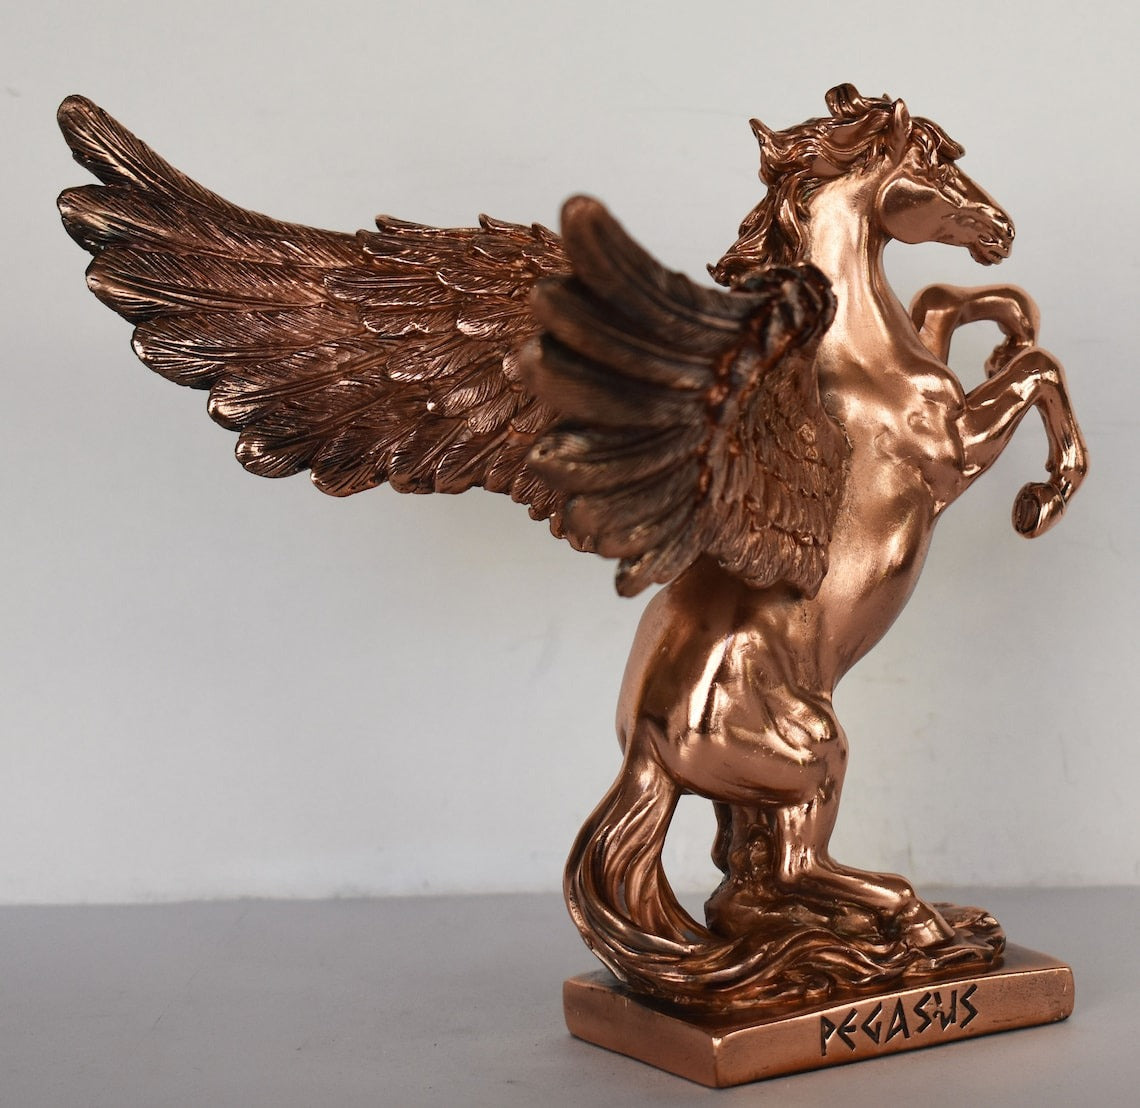 Pegasus - Mythical Immortal Winged Divine Horse - Bellerophon defeats Chimera - Constellation - Copper Plated Alabaster